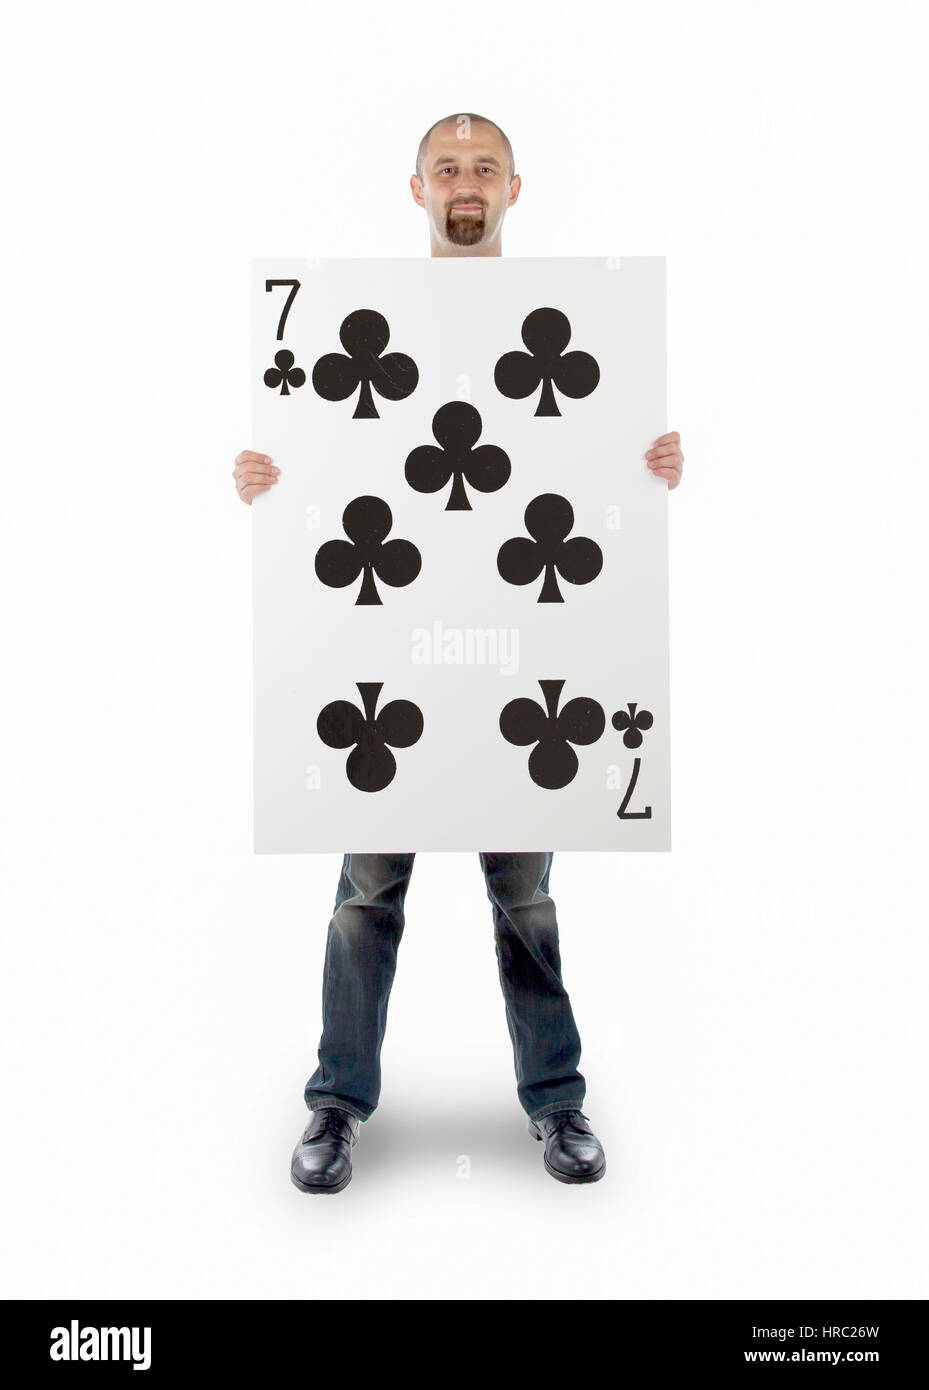 Businessman with large playing card - Seven of clubs Stock Photo